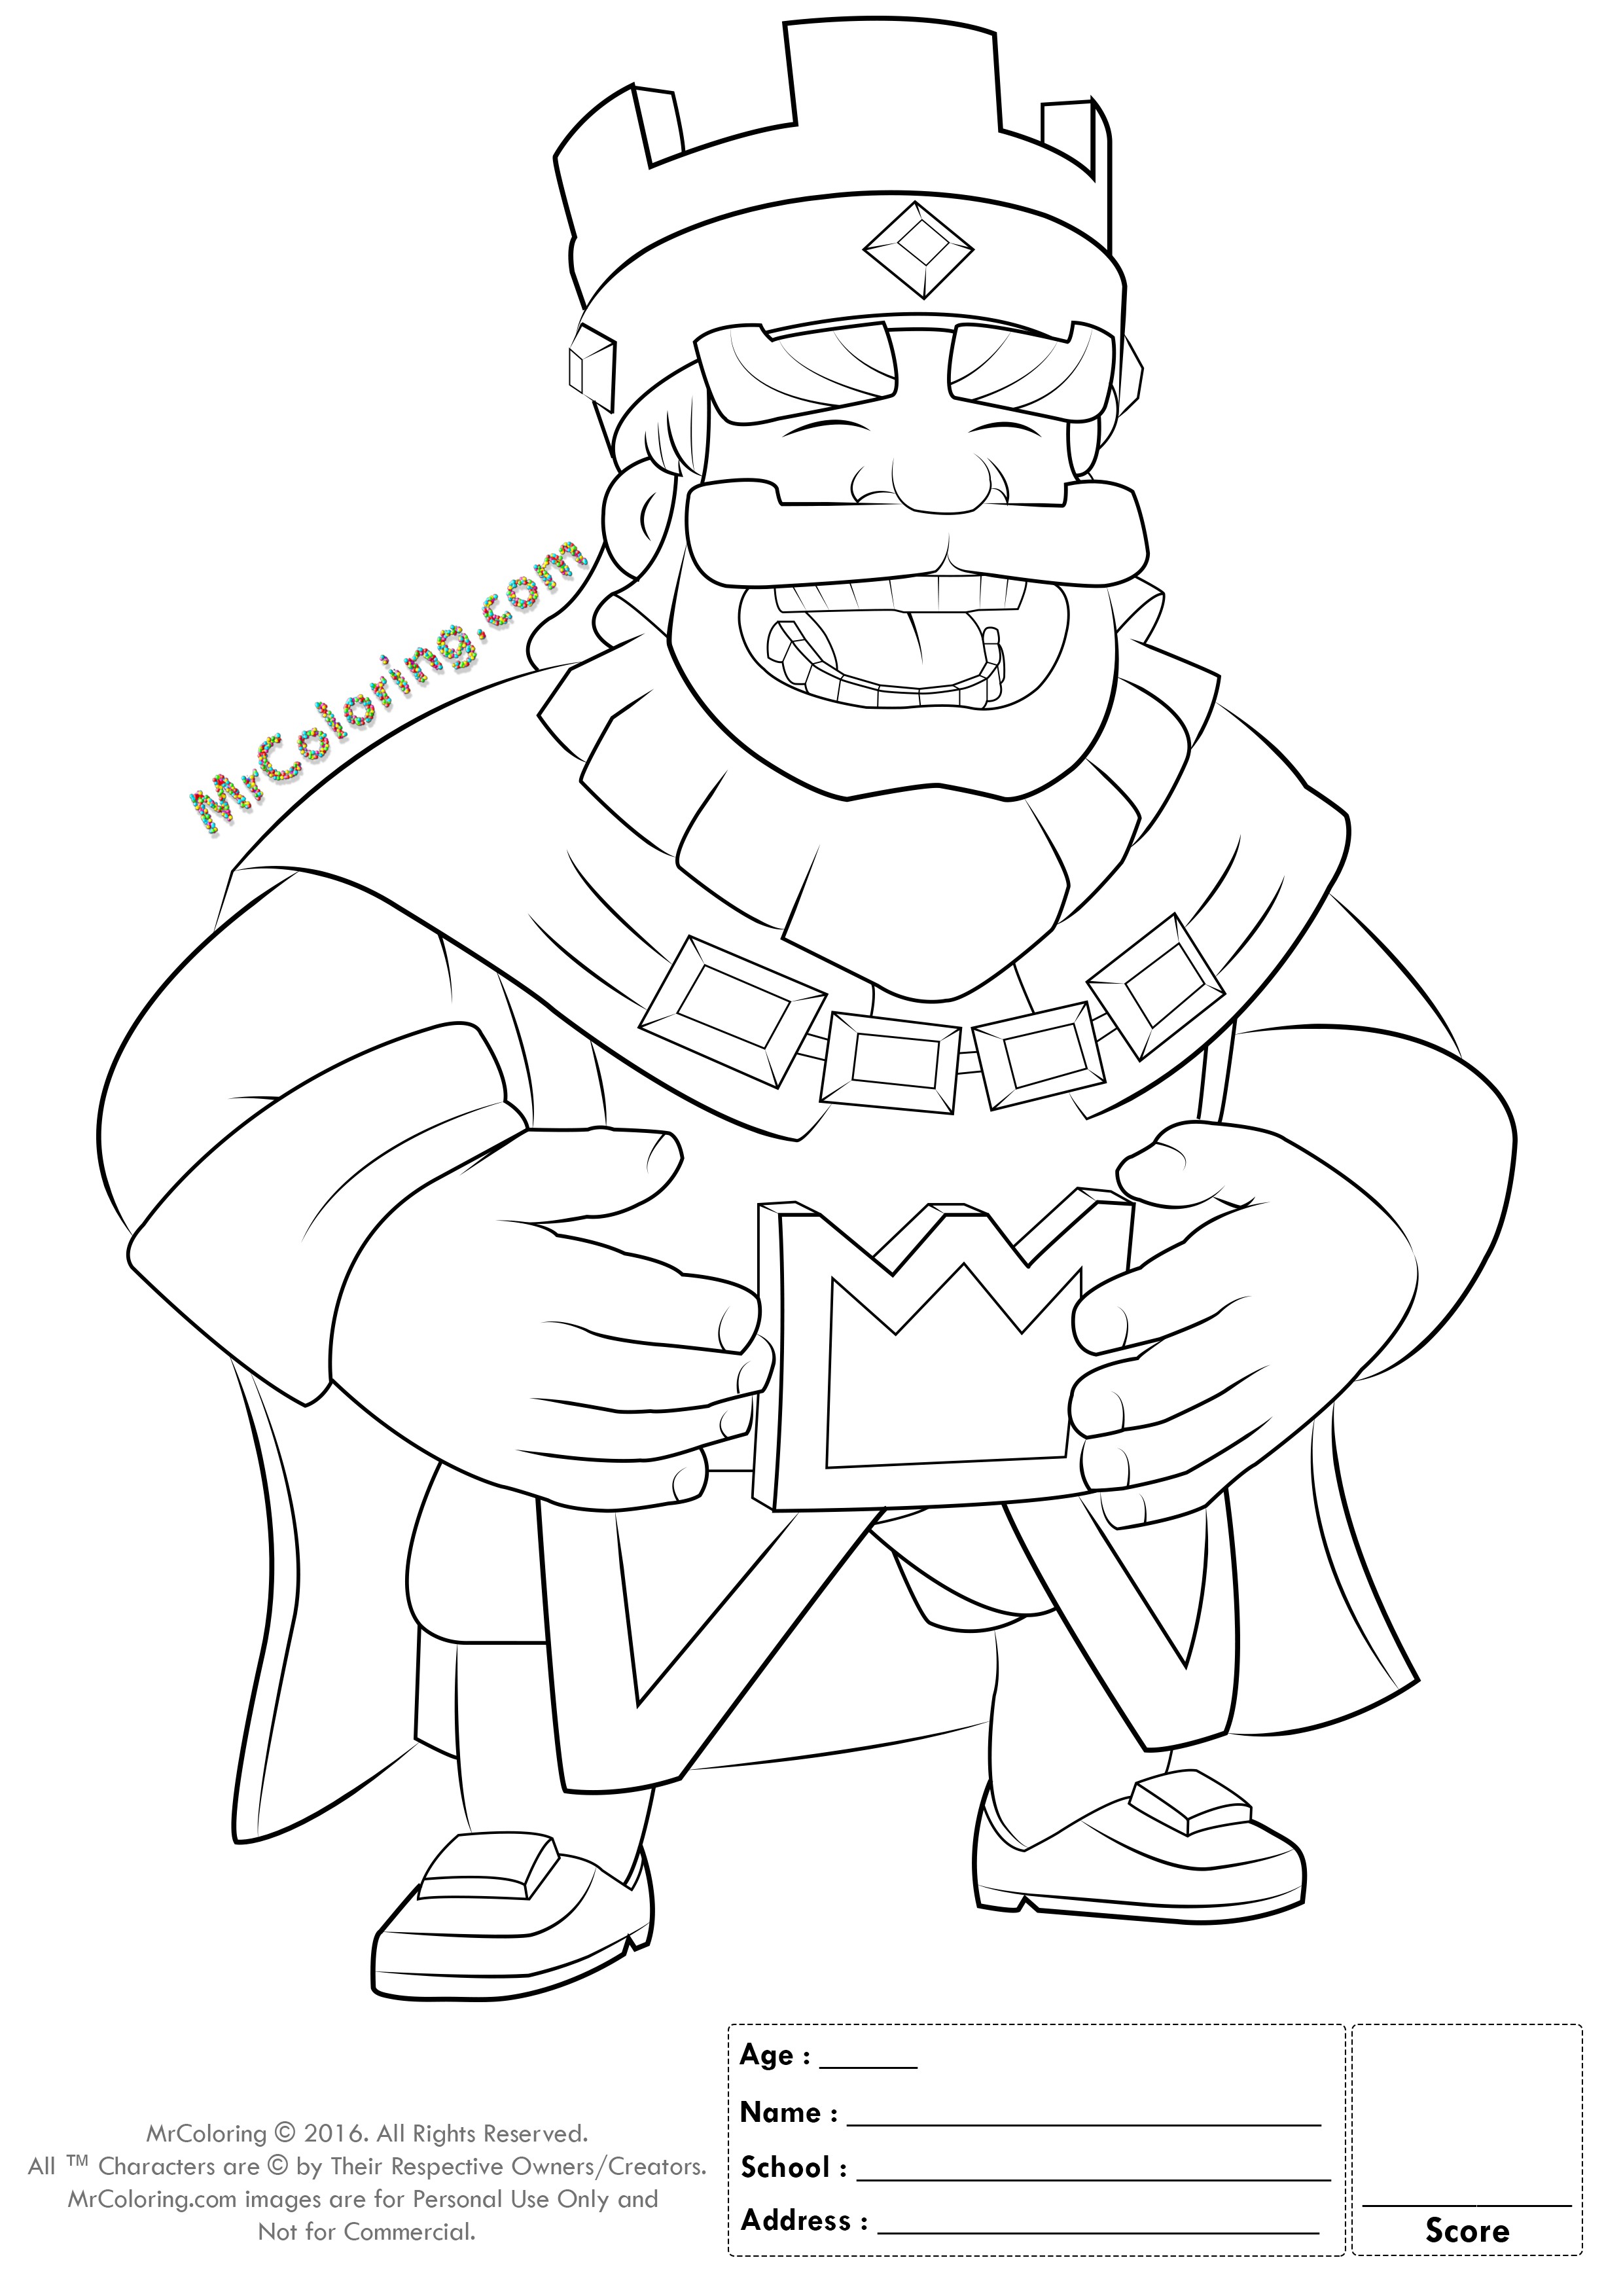 Printable Blue King Clash Royale line Coloring Pages 1